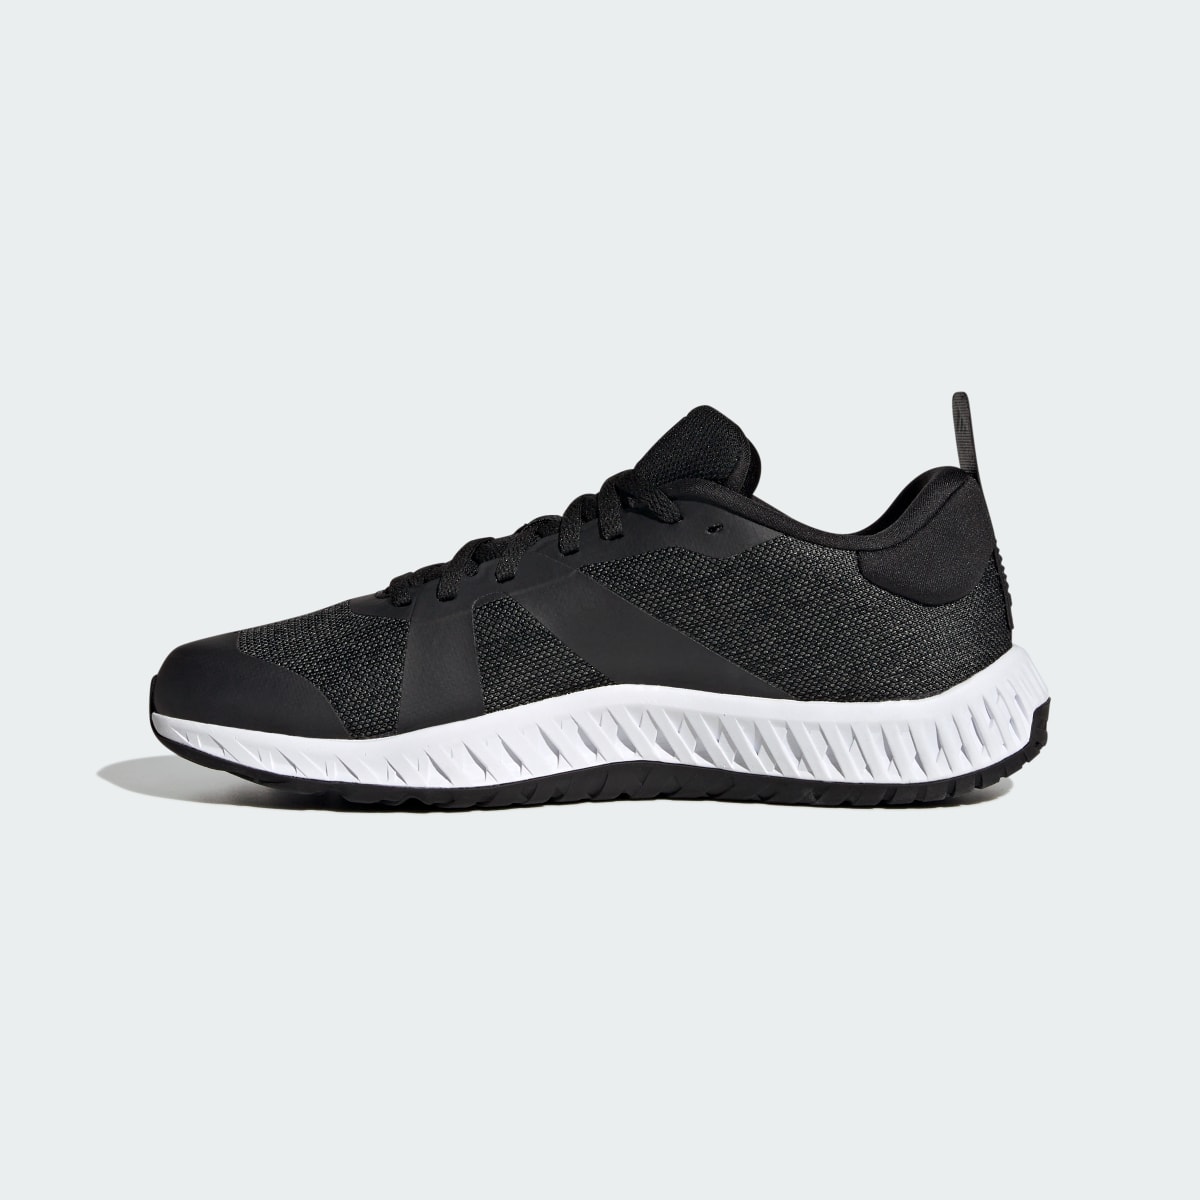 Adidas Everyset Trainer Shoes. 7